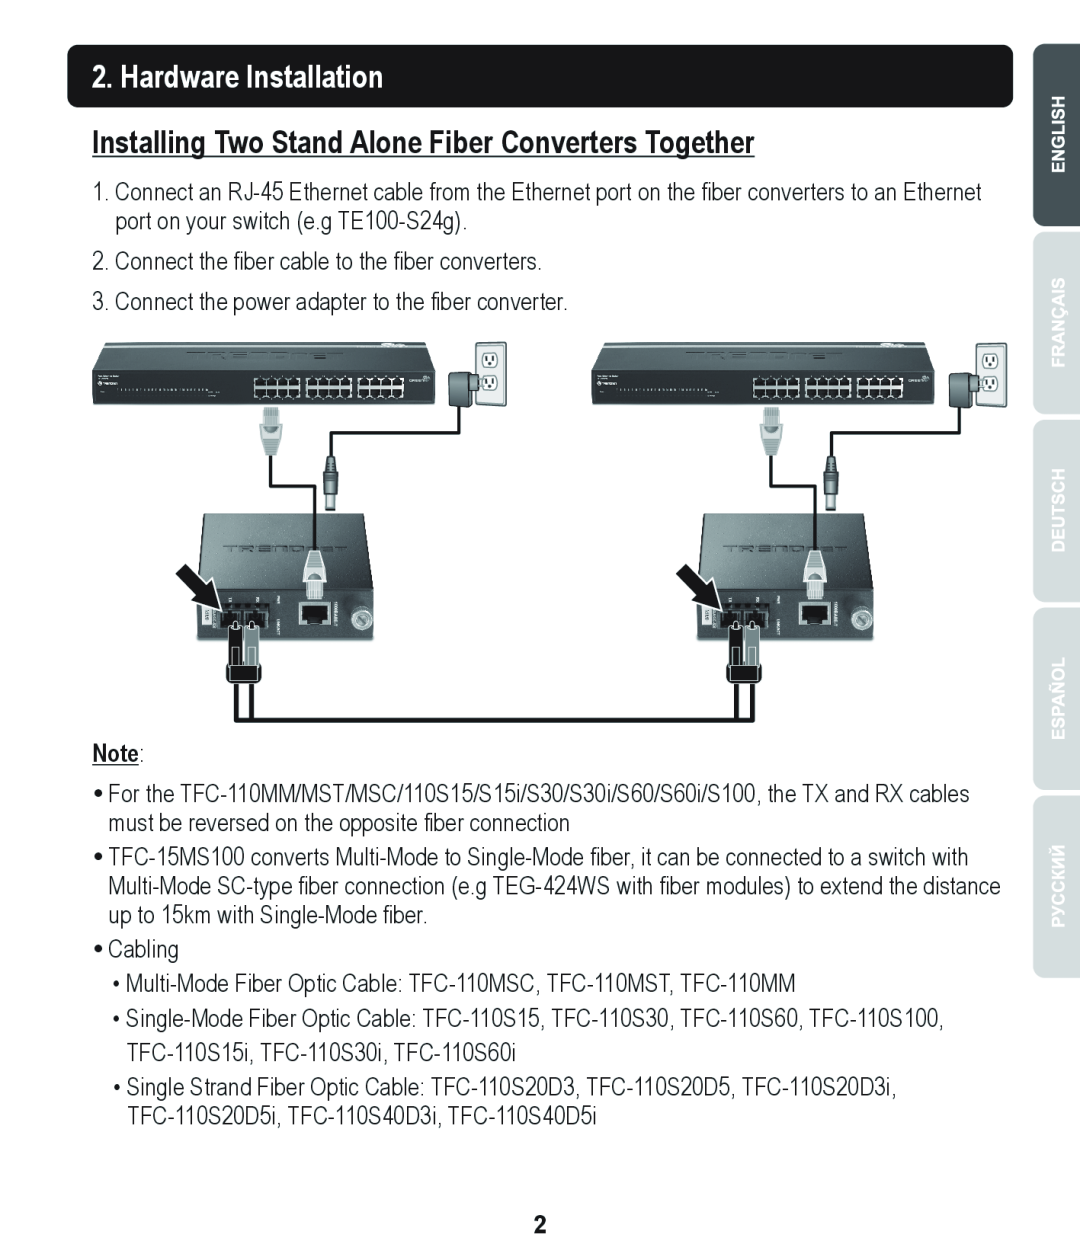 TRENDnet TE100S24G manual Hardware Installation, Installing Two Stand Alone Fiber Converters Together 